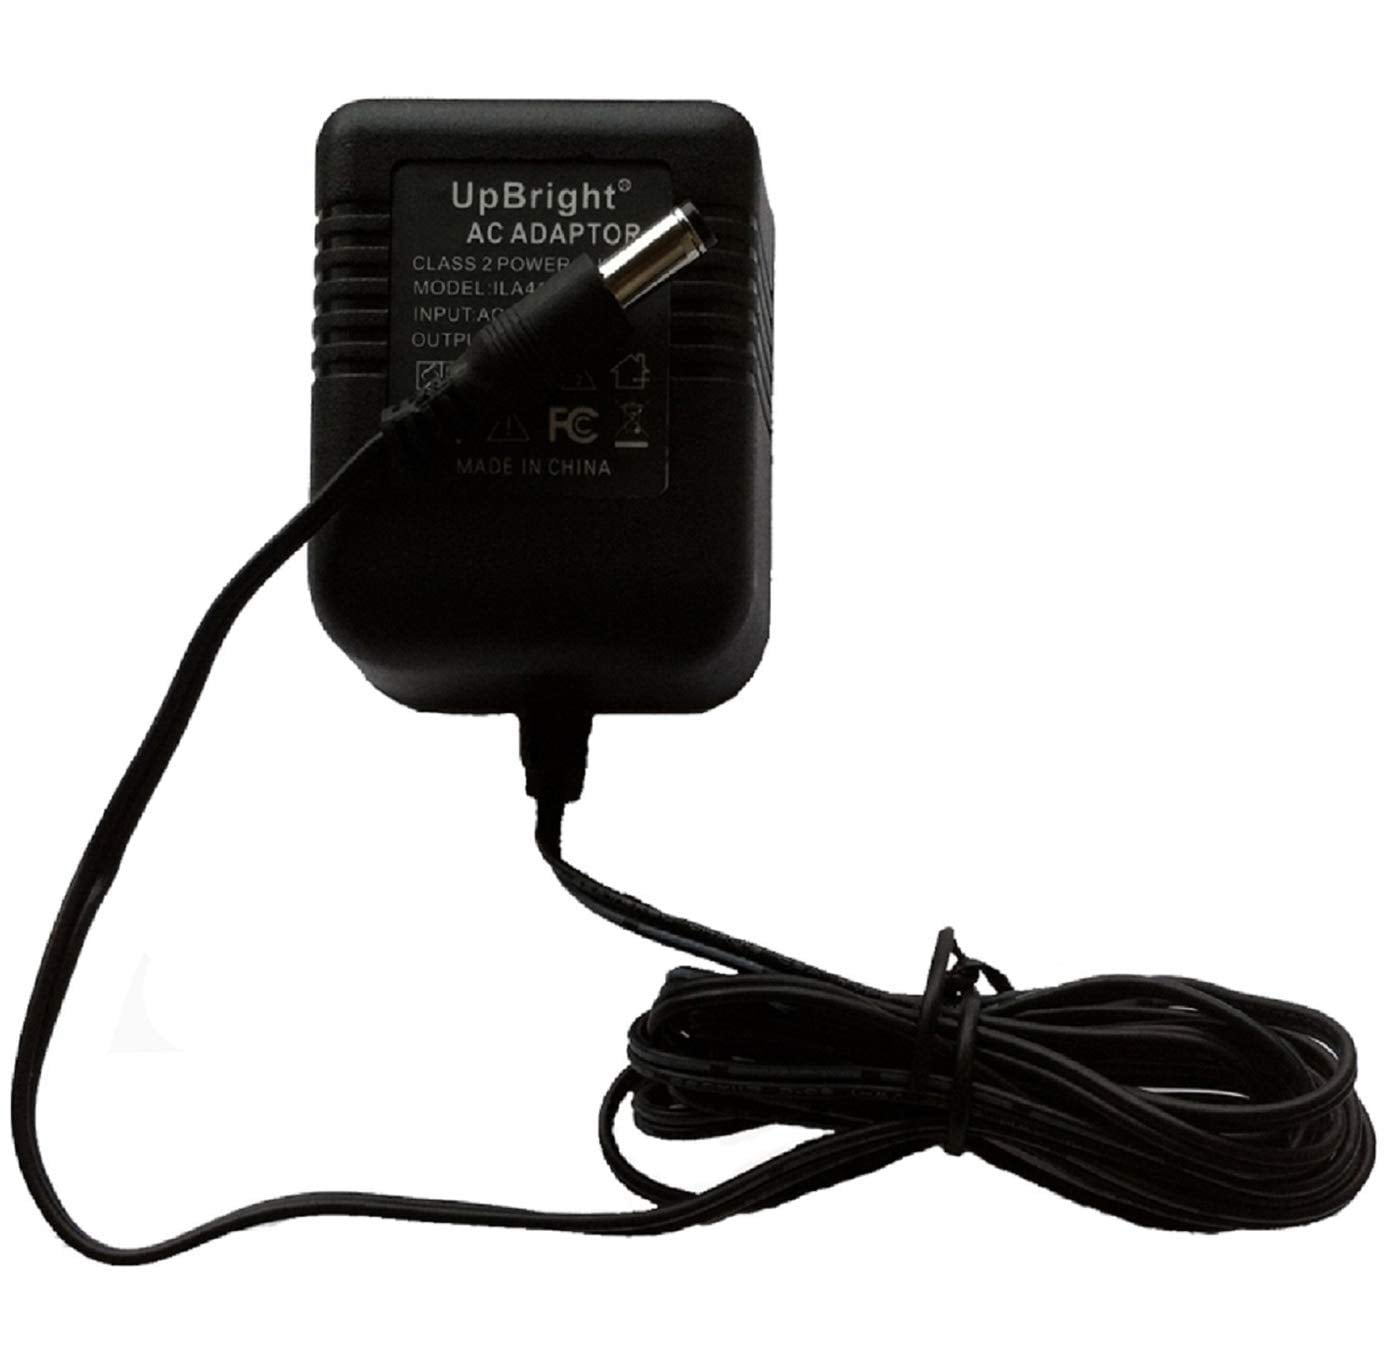 AC to AC Adapter for Vestax AC-14-US AC-14 1806-3852-1 180638521 ITE Power Cord 